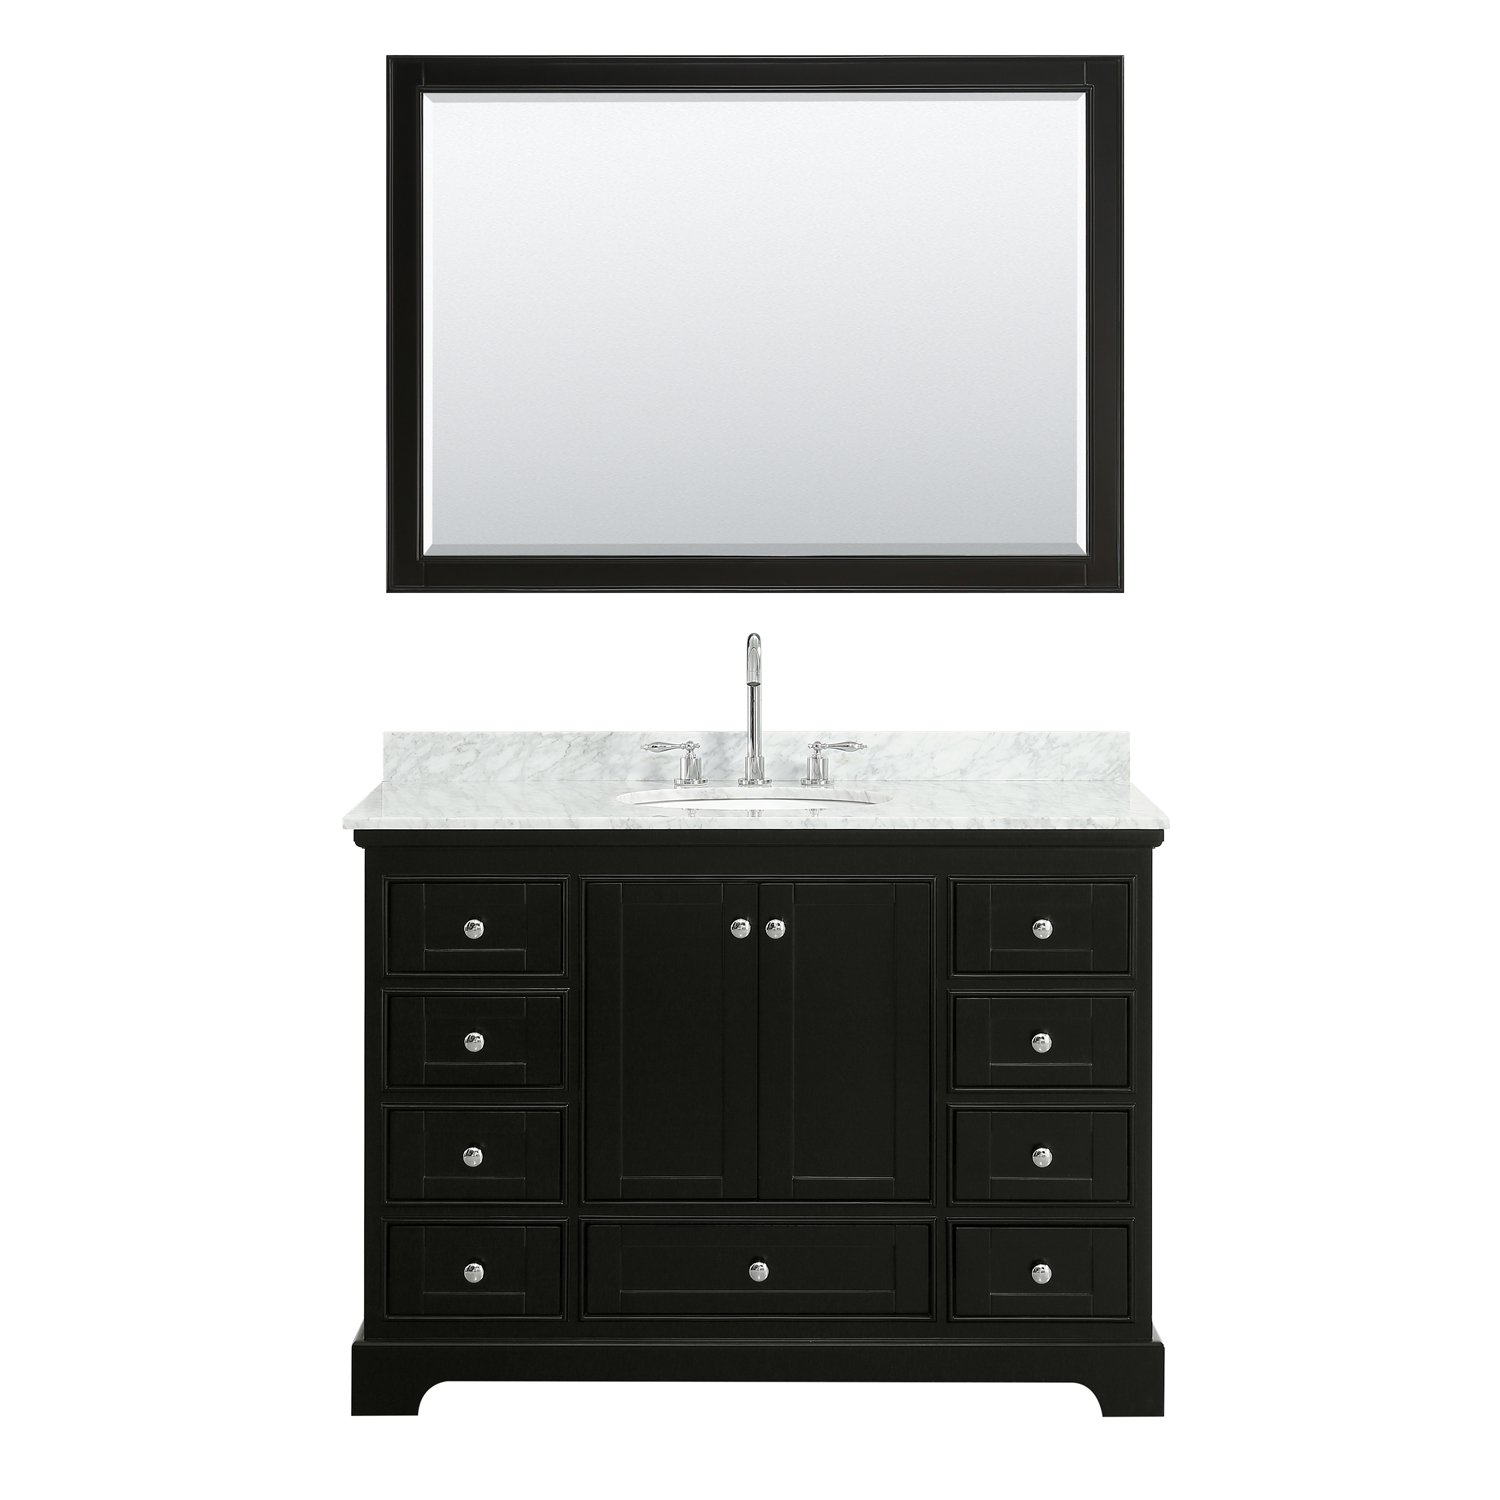 48" Single Bathroom Vanity in White Carrara Marble Countertop with Undermount Porcelain Sink, Medicine Cabinet, Mirror and Color Options